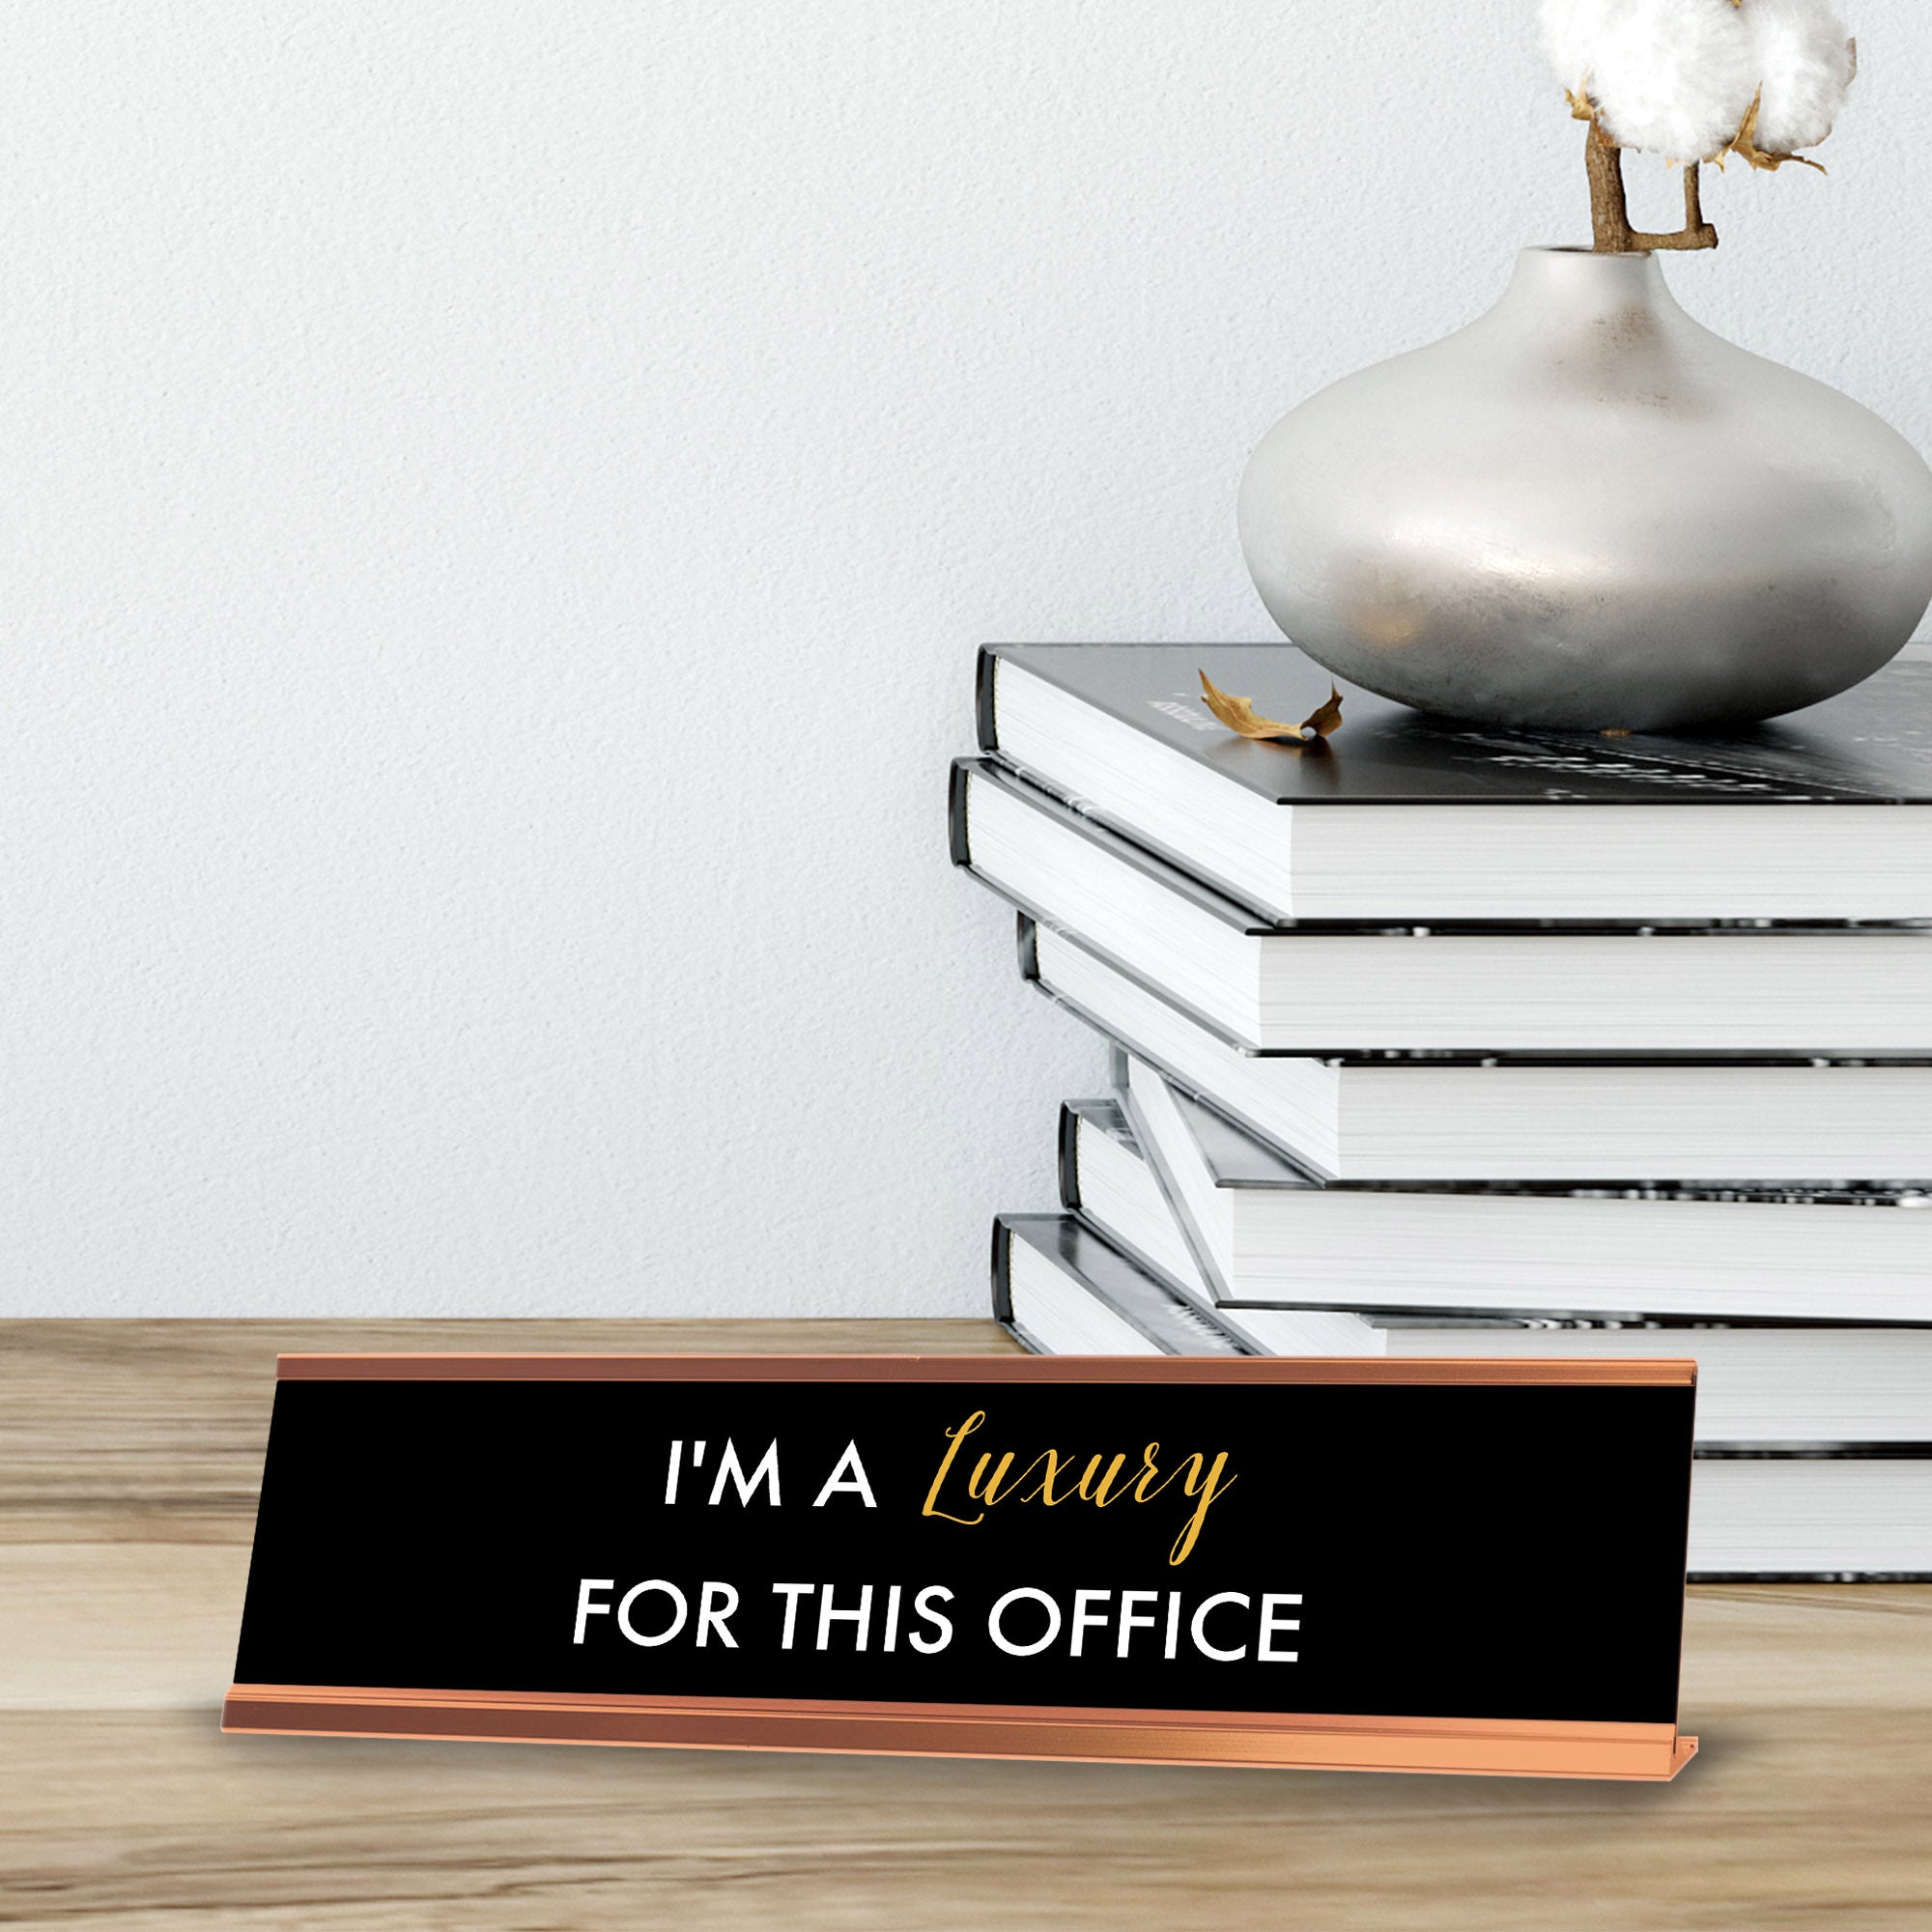 I'm a Luxury for this Office, Black Gold Frame, Desk Sign (2 x 8")